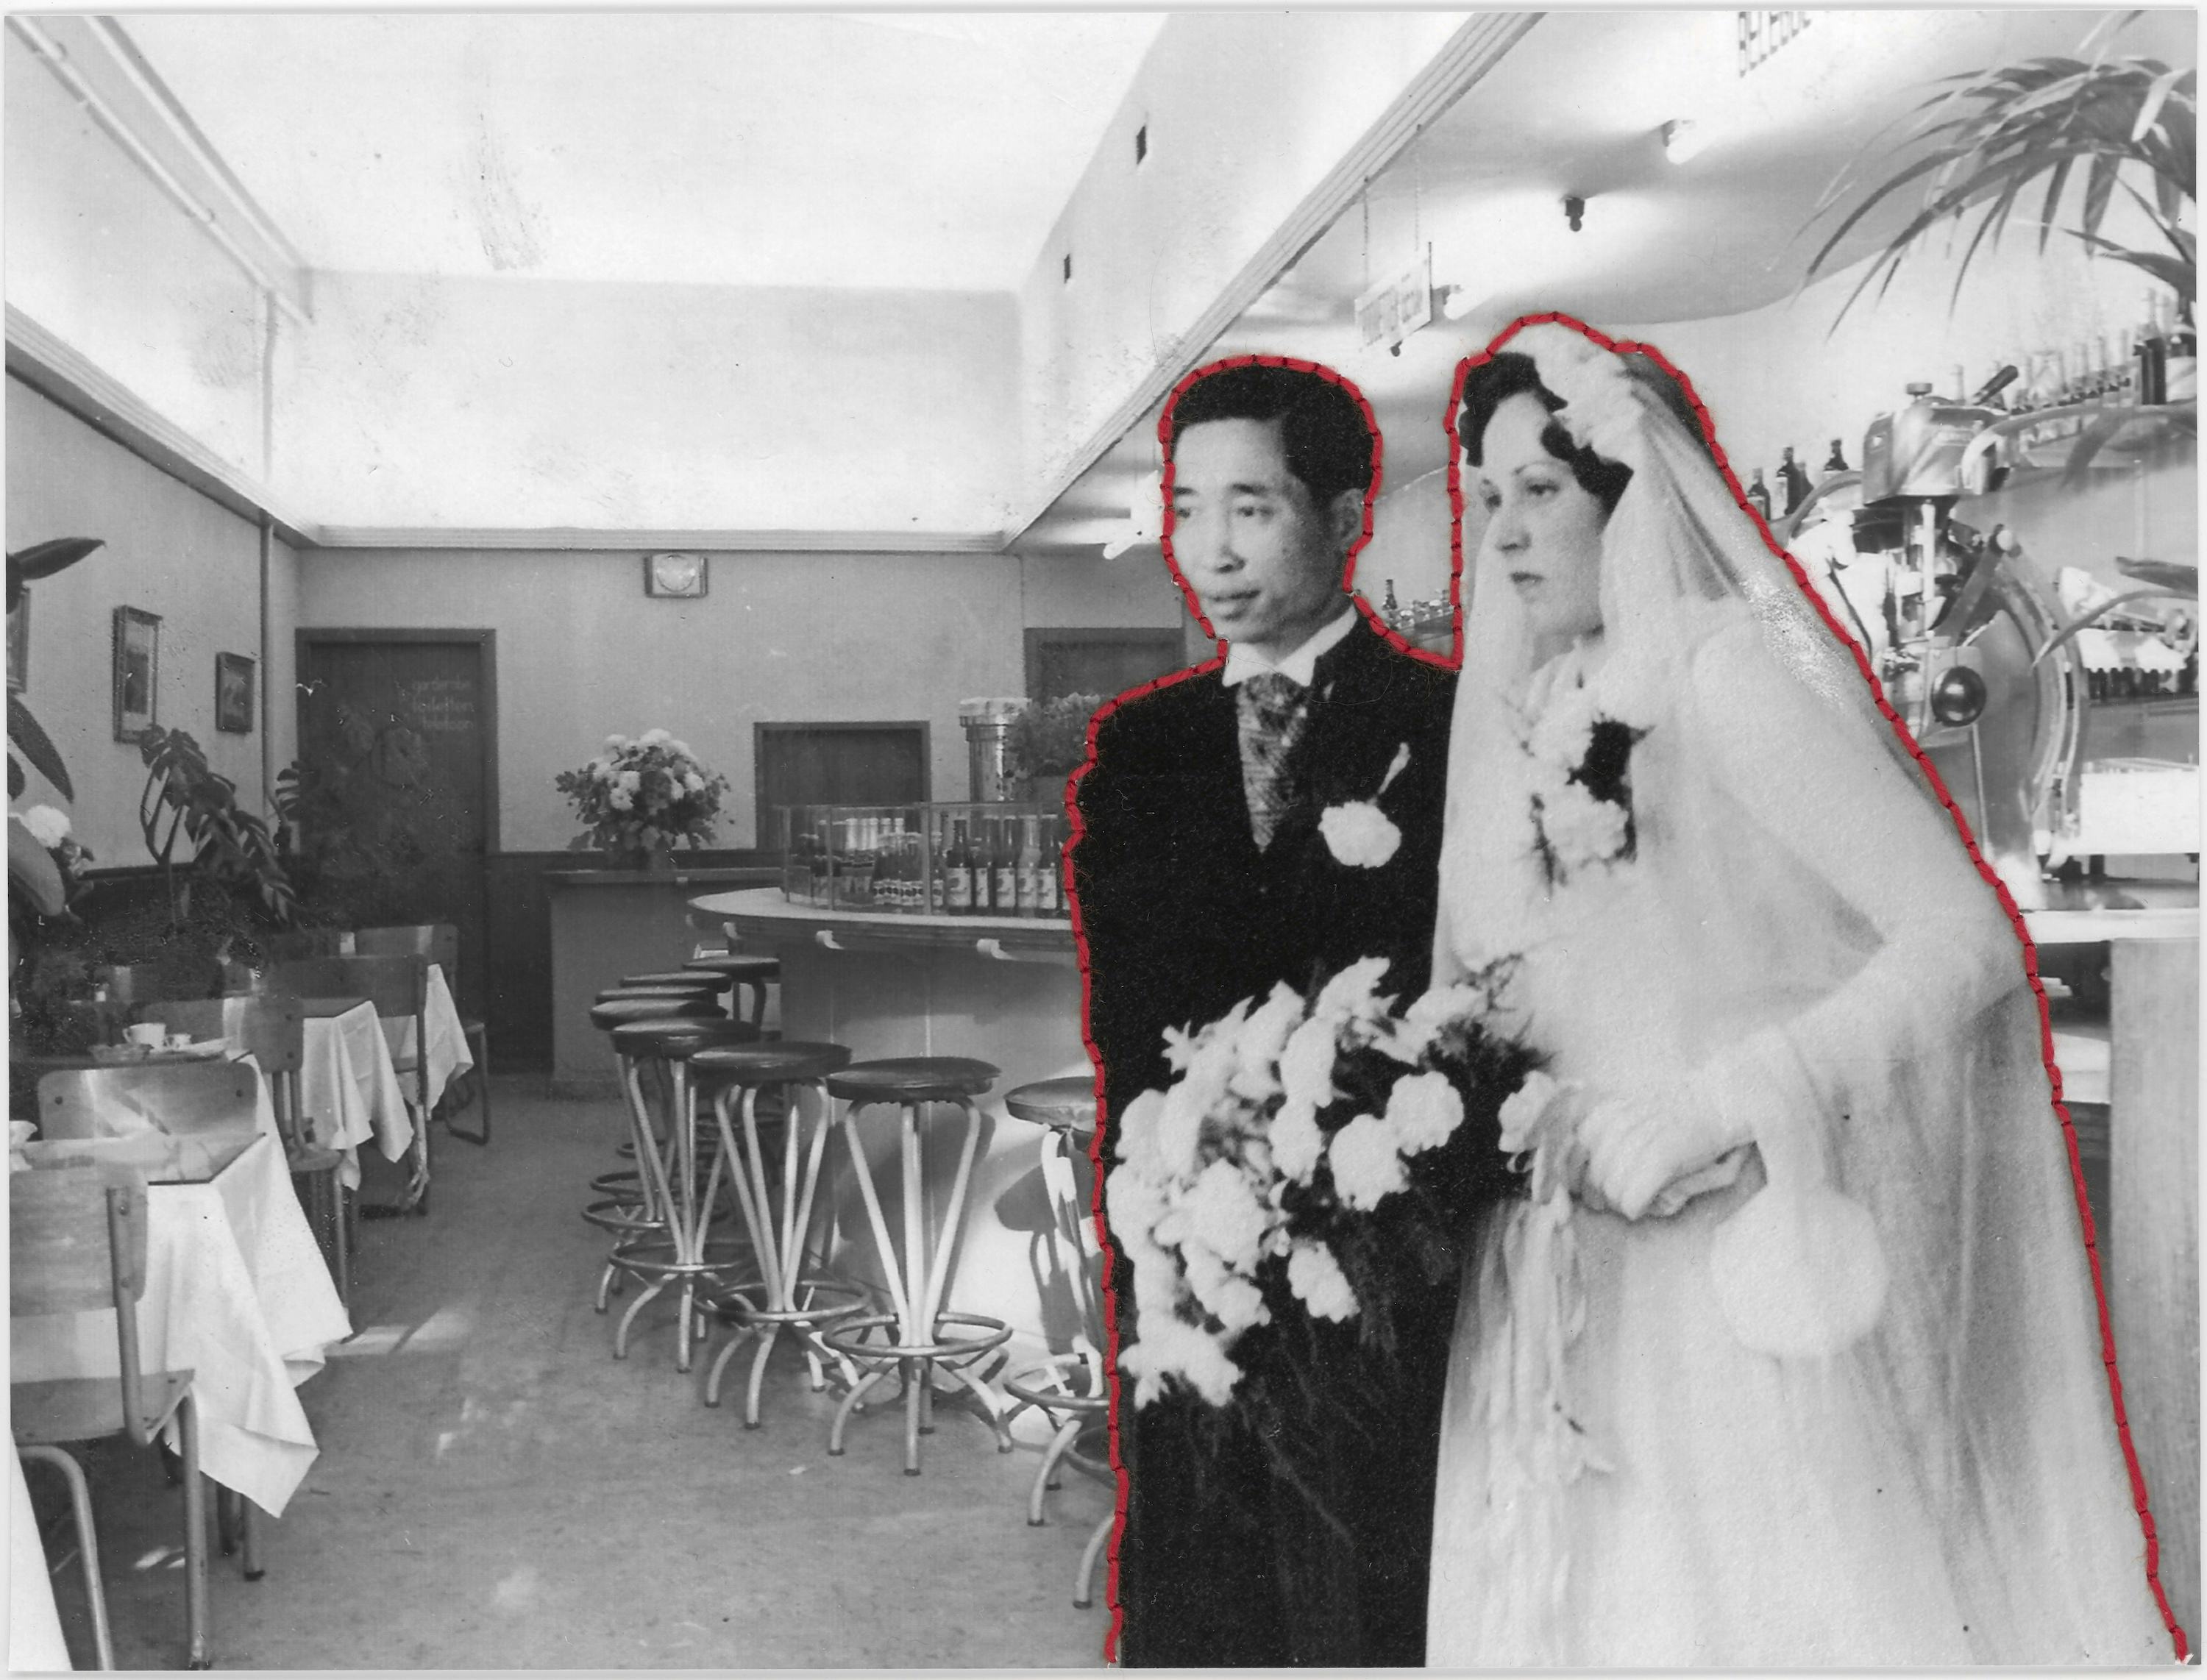 Black and white photograph of Laura Chen's grandparents on their wedding day with red thread sewed around them.